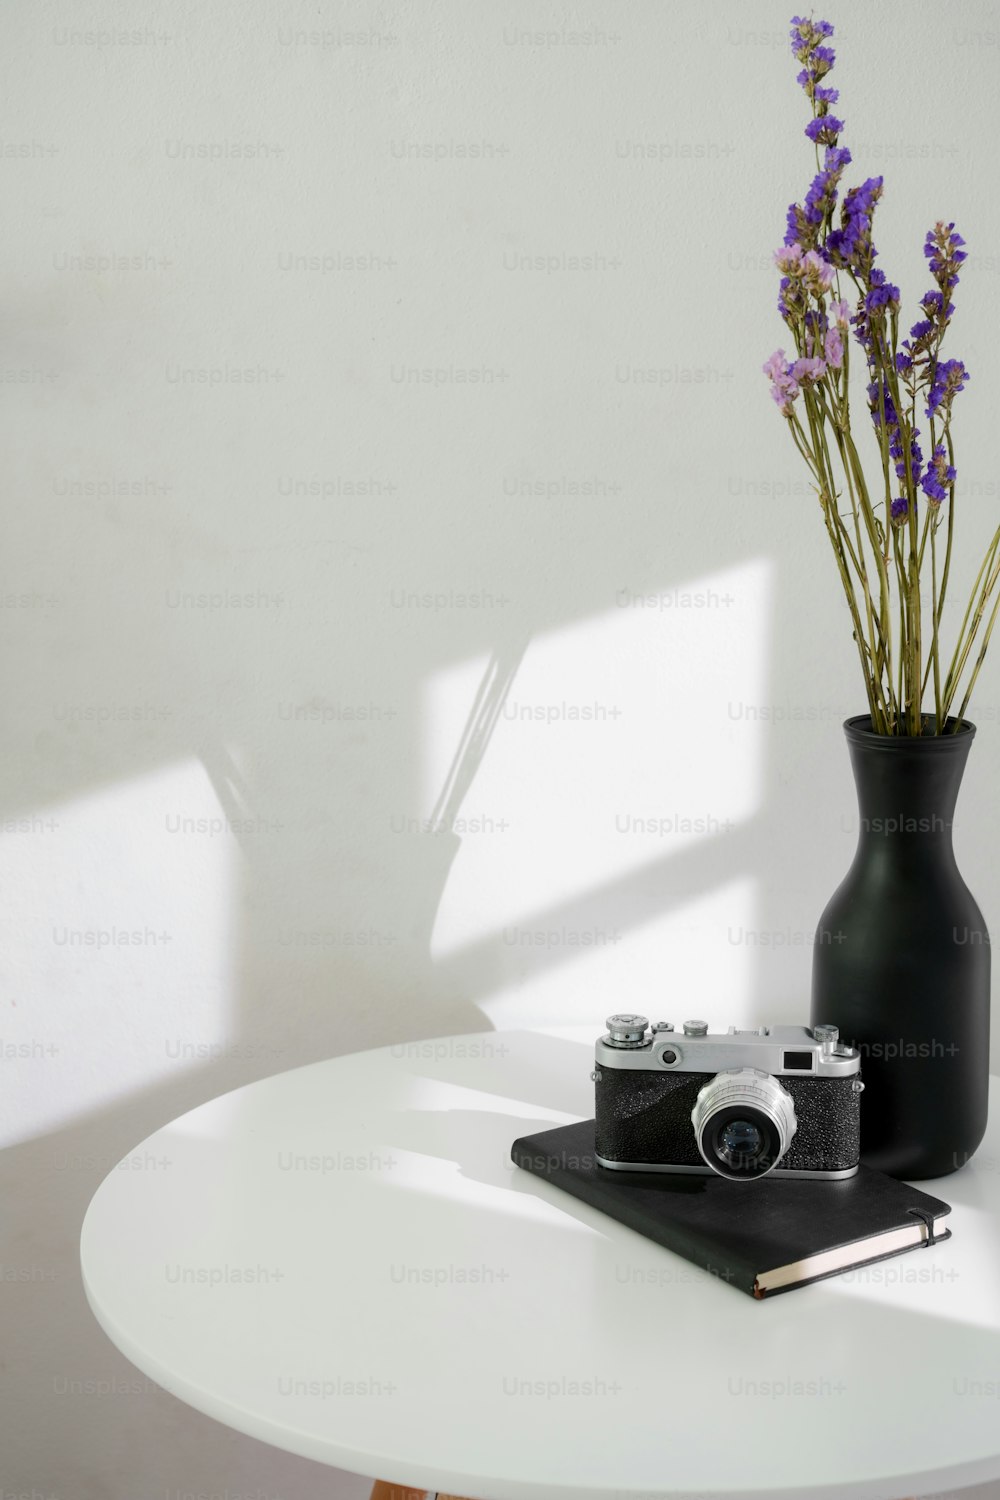 Modern home interior design of living room with ceramic vase, camera and notebook on white circle table with white wall